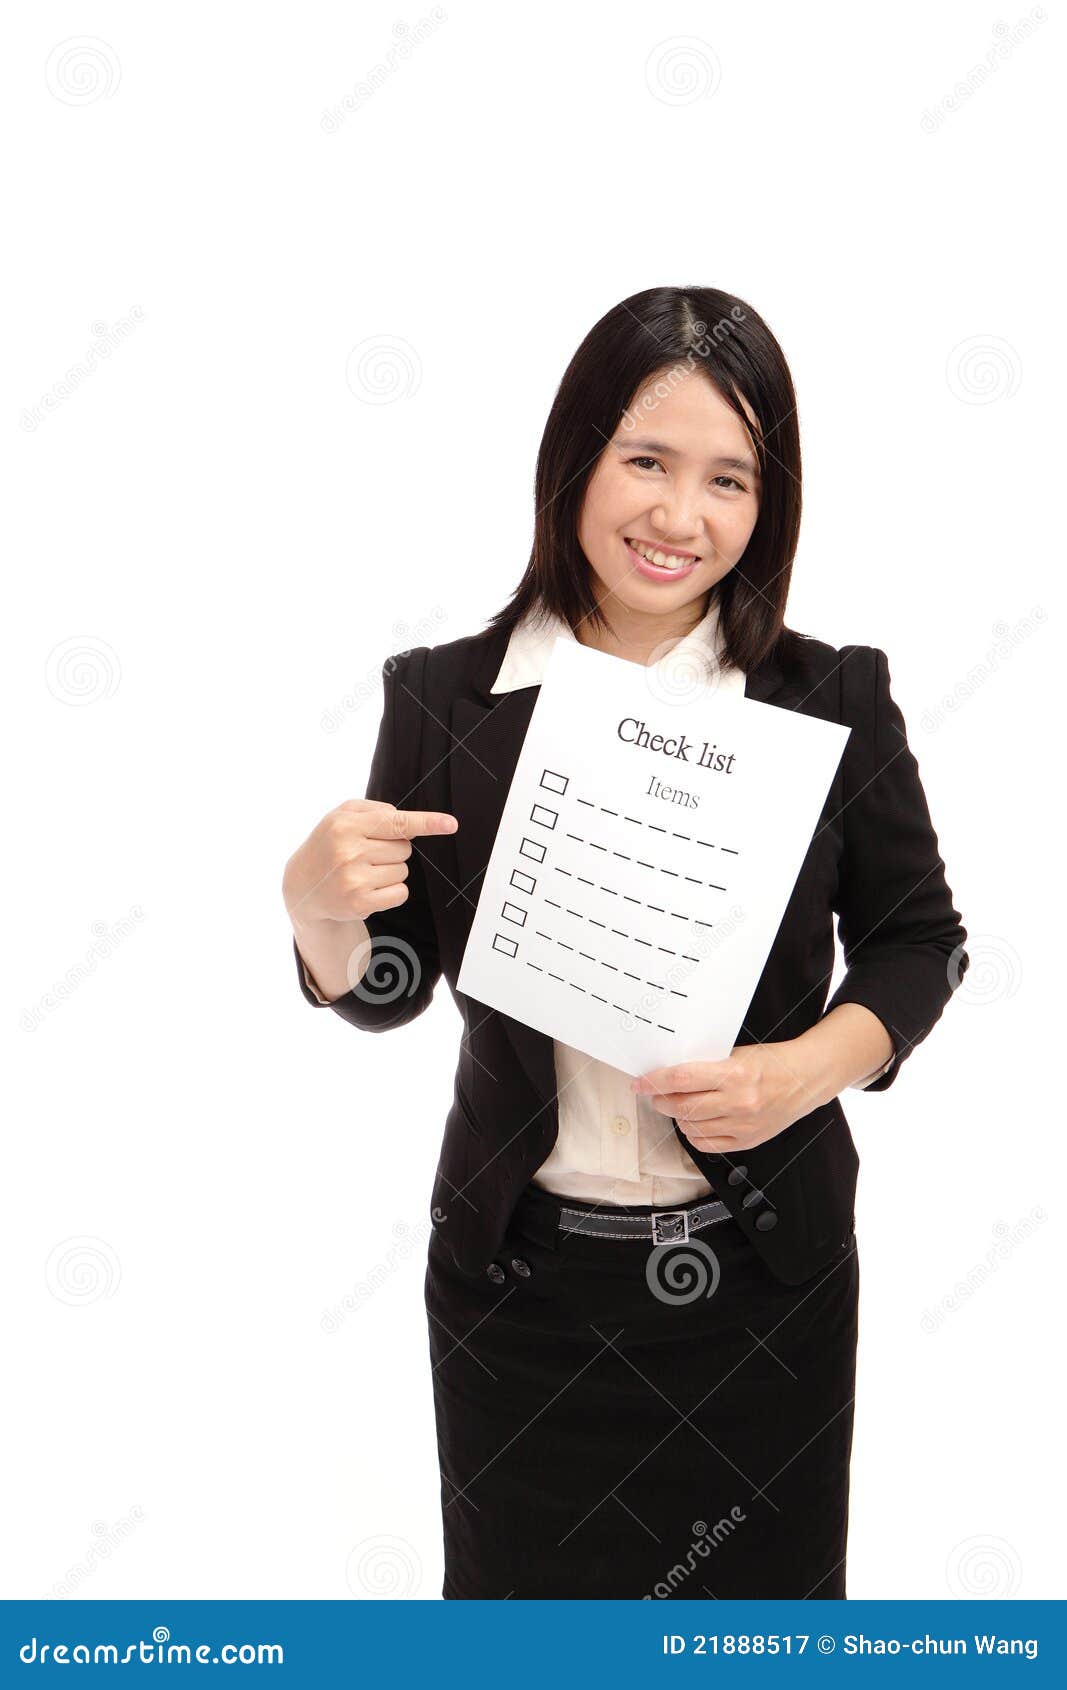 business woman smilingly take check item paper